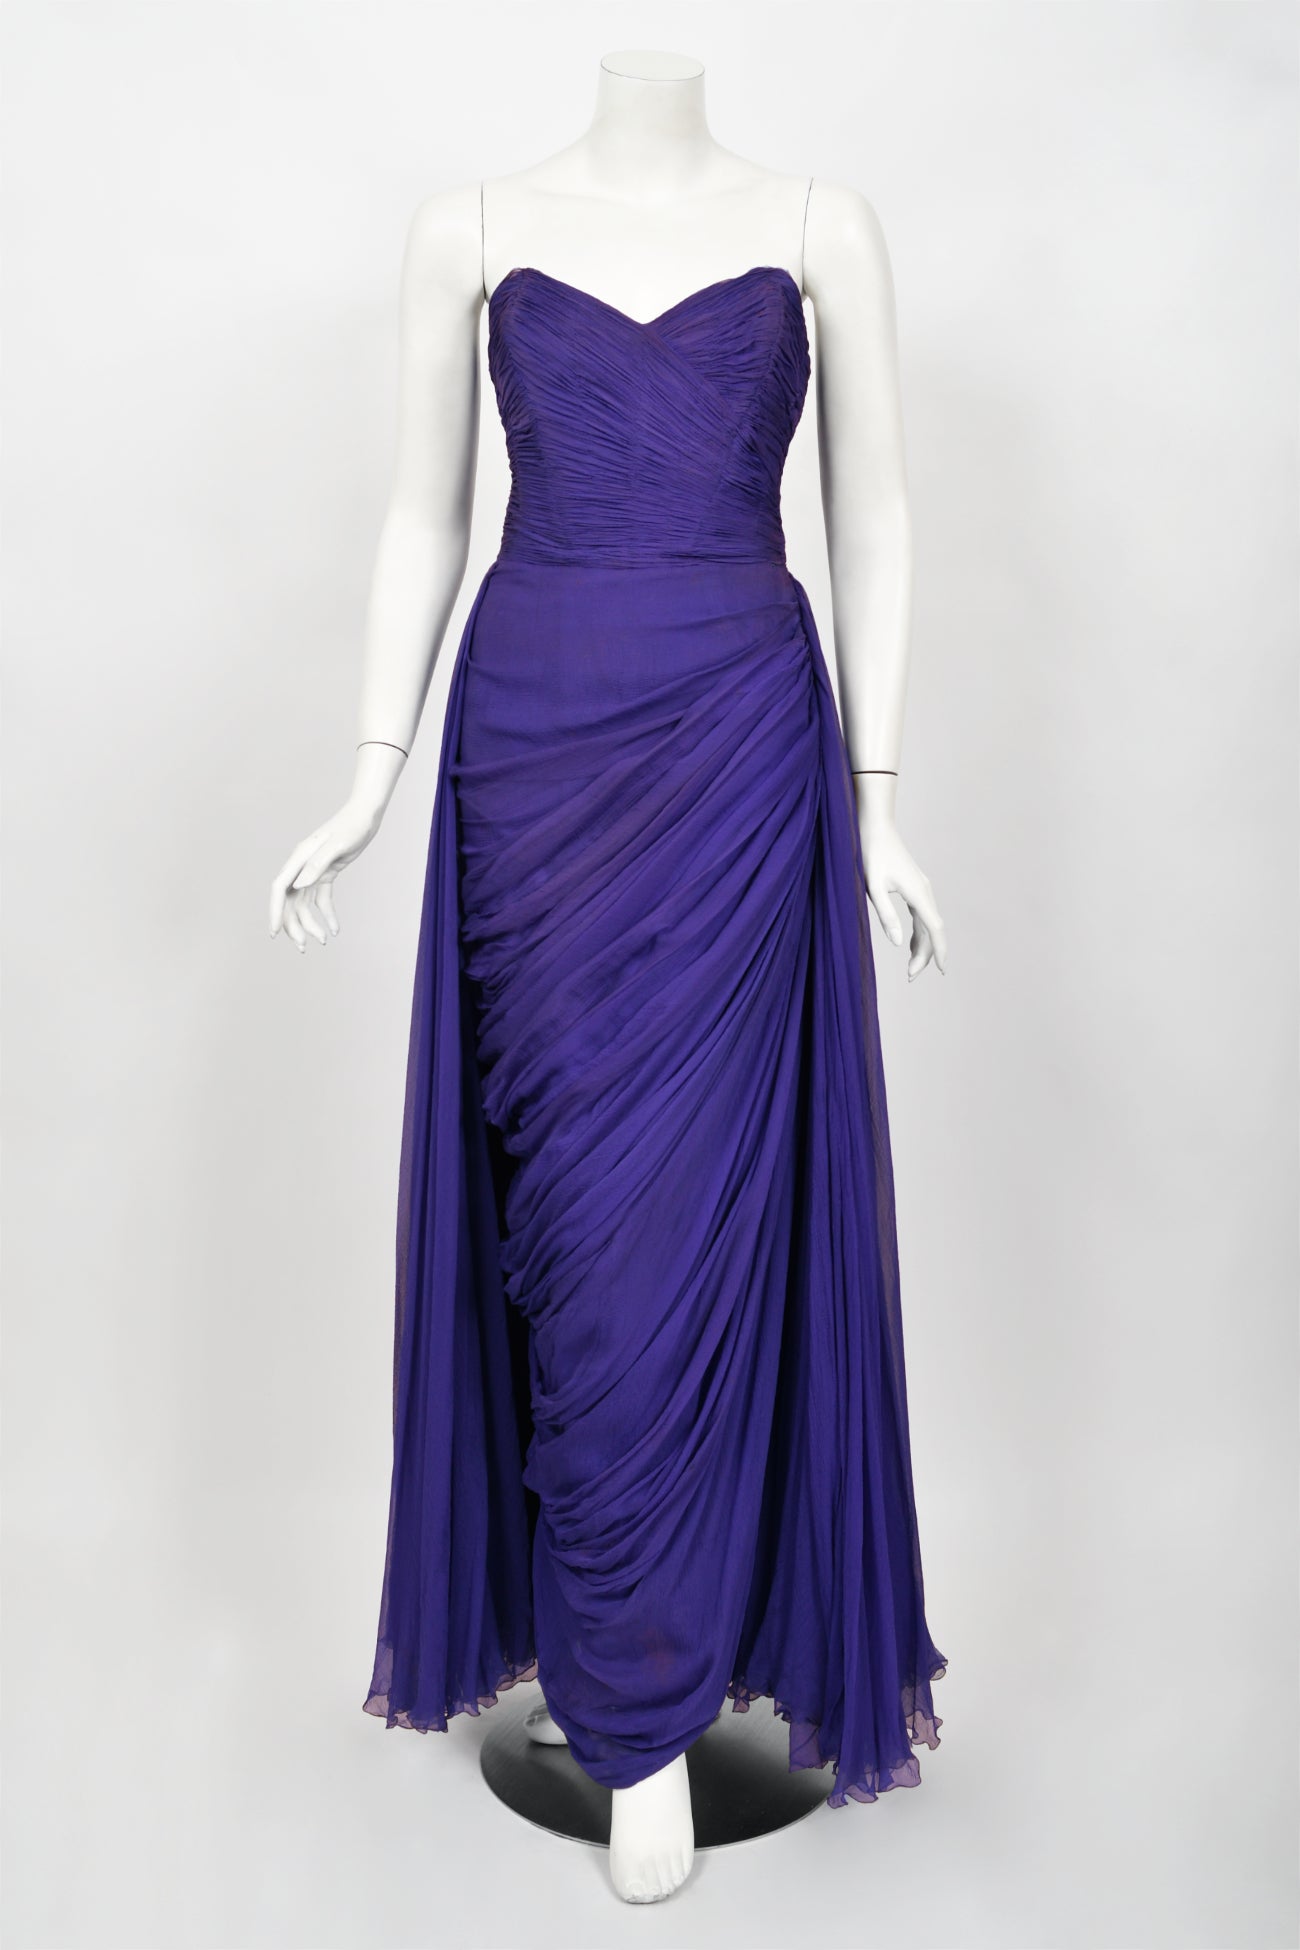 Vintage 1950s Curiel Couture Pleated Purple Silk Chiffon Strapless Goddess Gown  For Sale 9